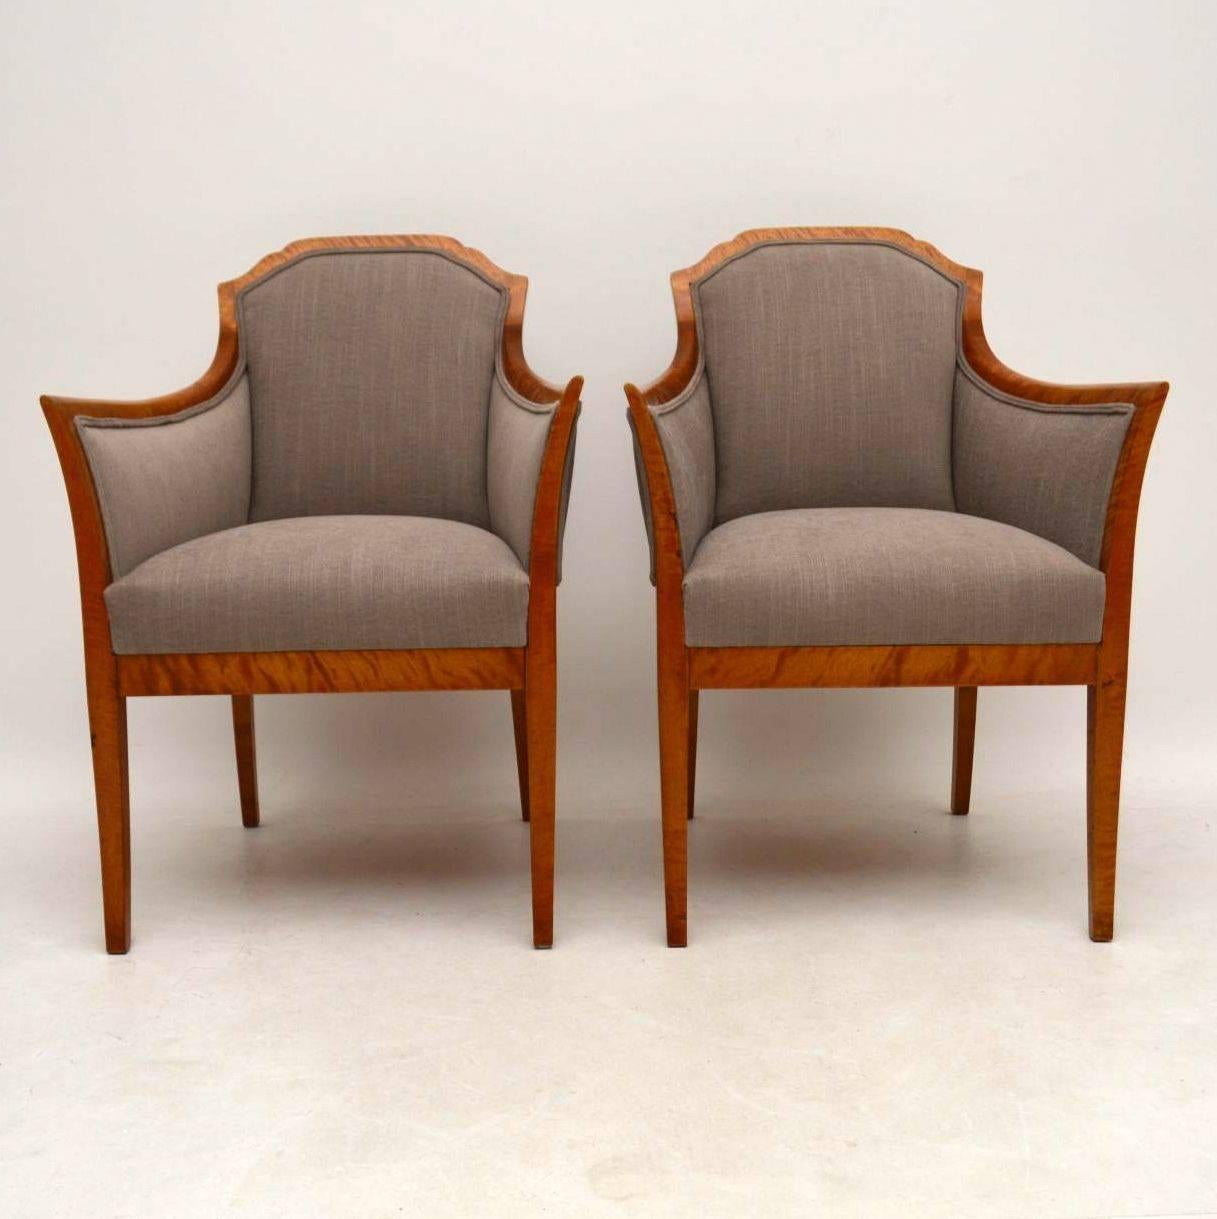 These are one of the nicest pairs of antique Swedish armchairs I’ve ever had. They are elegant & very stylish. The satin birch frames have a lovely grain and a warm color. These armchairs have just come over from Sweden, been polished and